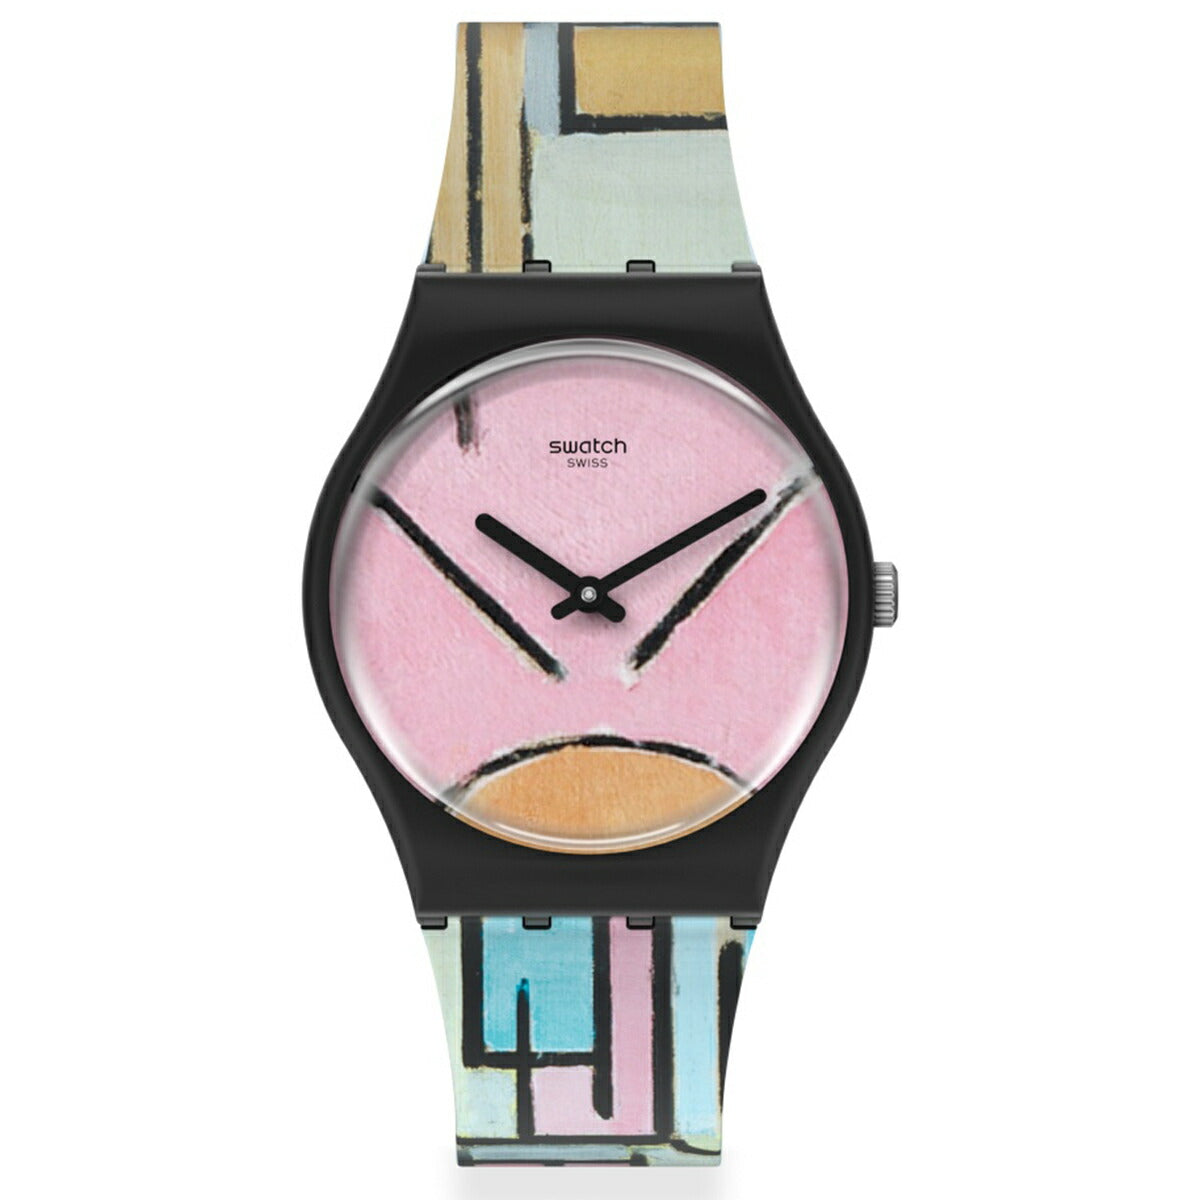 swatch スウォッチ MoMA 腕時計 メンズ レディース ジェント コンポジション・イン・オーバル・ウィズ・カラー・プレーンズ・1 Gent COMPOSITION IN OVAL WITH COLOR PLANES 1 GZ350